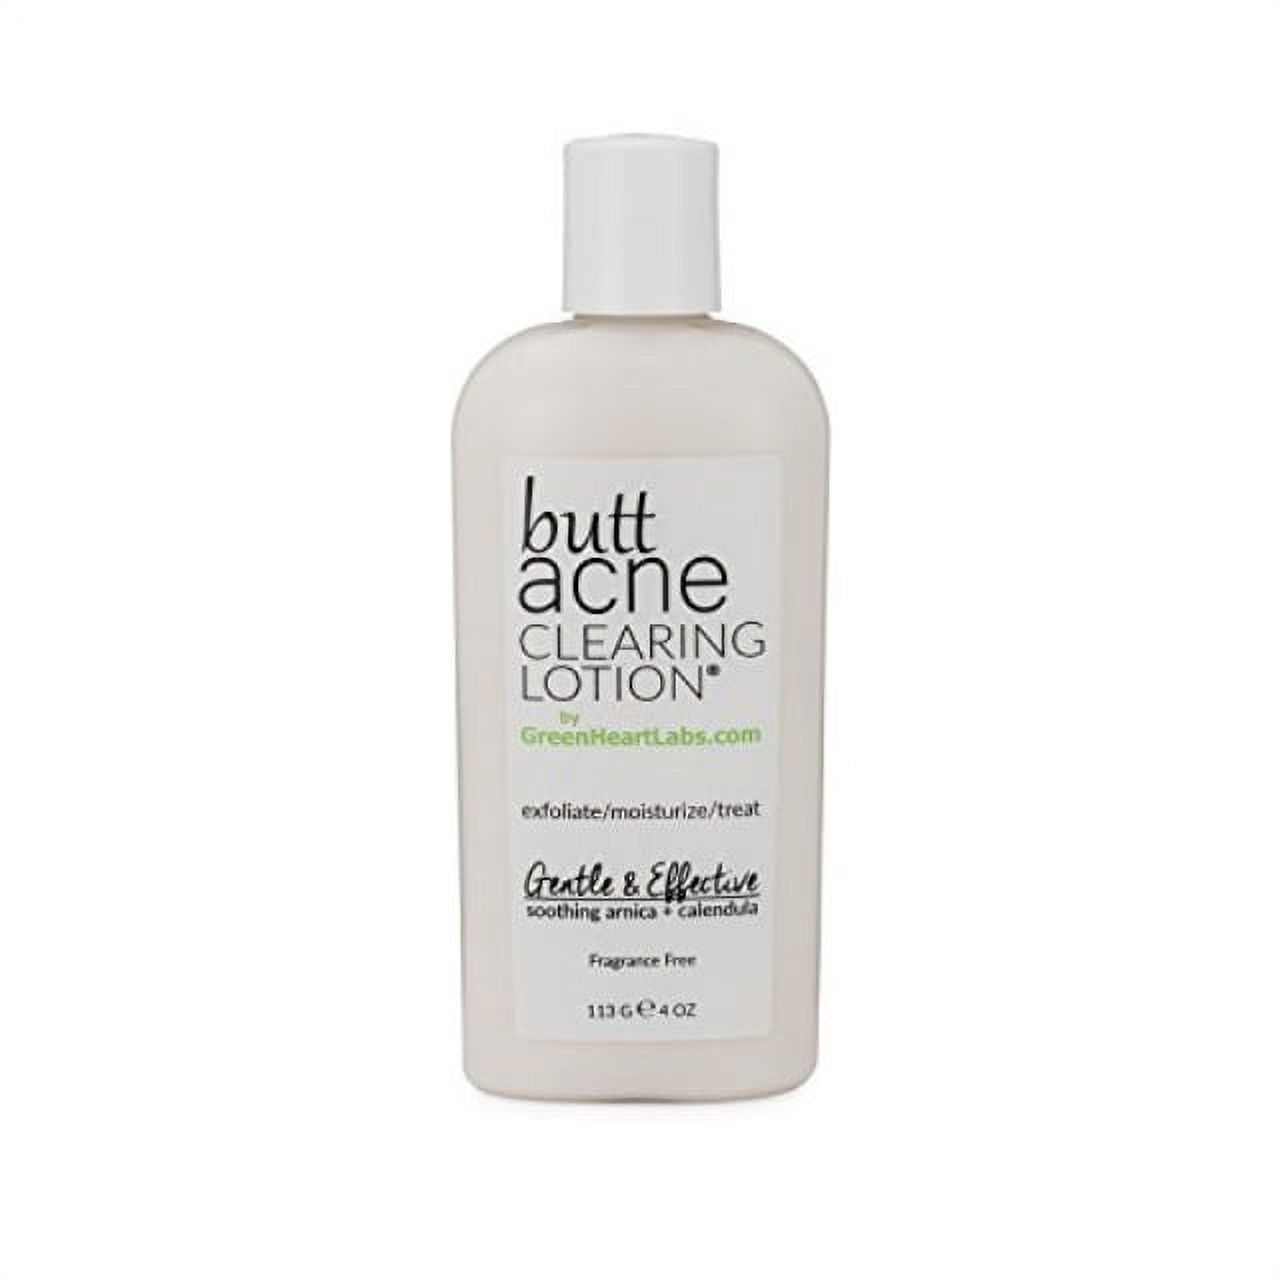 Butt Acne Clearing Lotion, 4oz - image 1 of 4